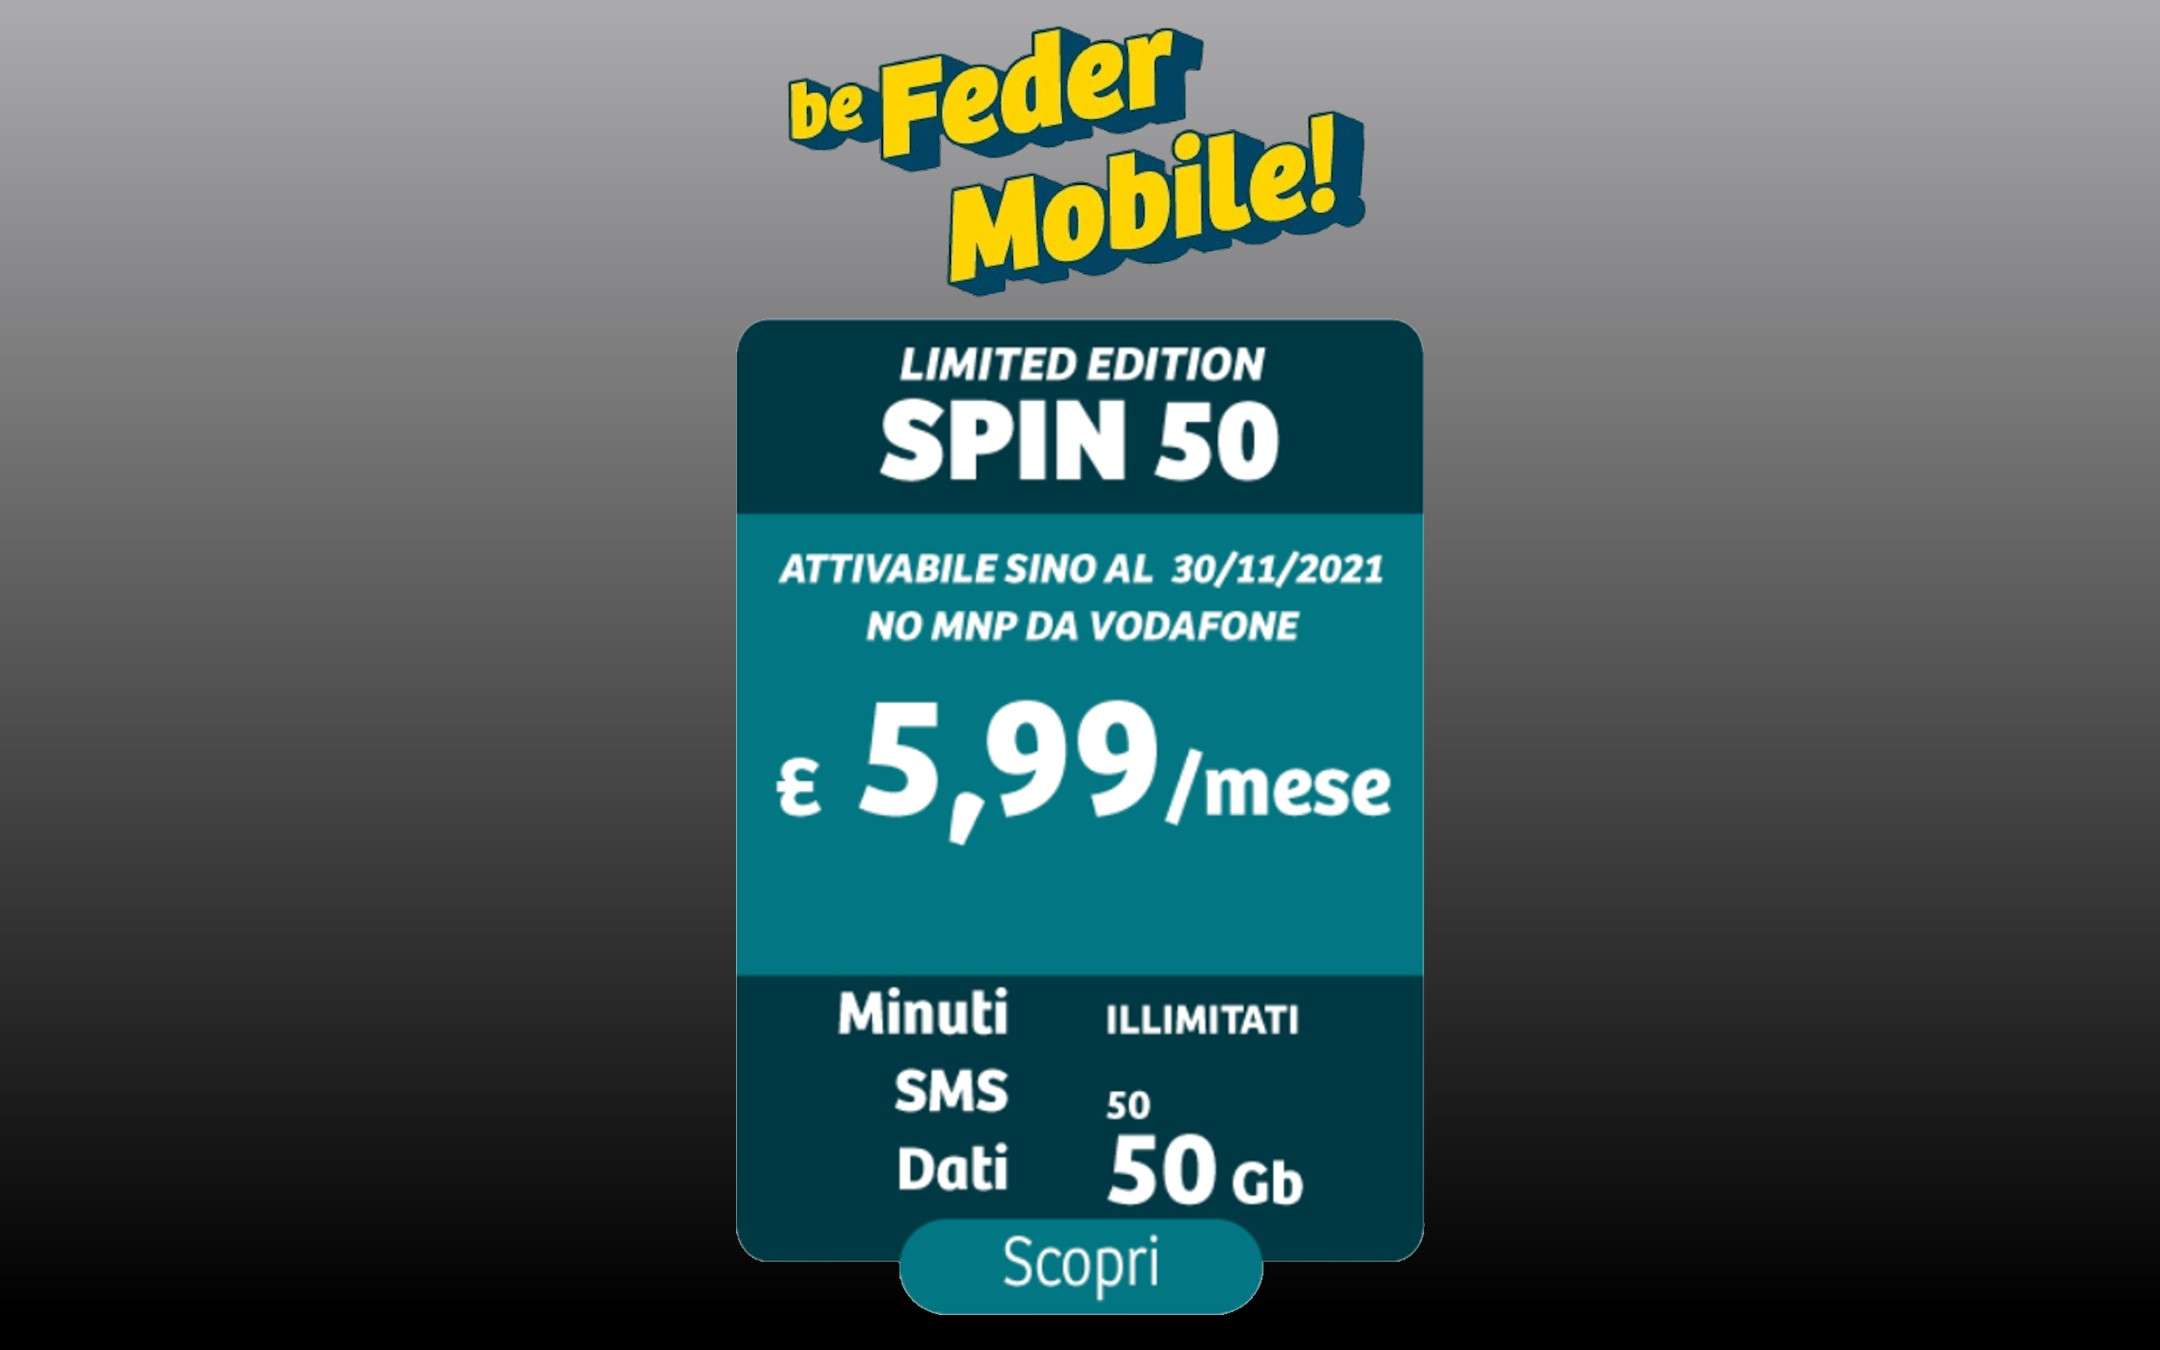 SPIN 50 di Feder Mobile in Limited Edition a 5,99€